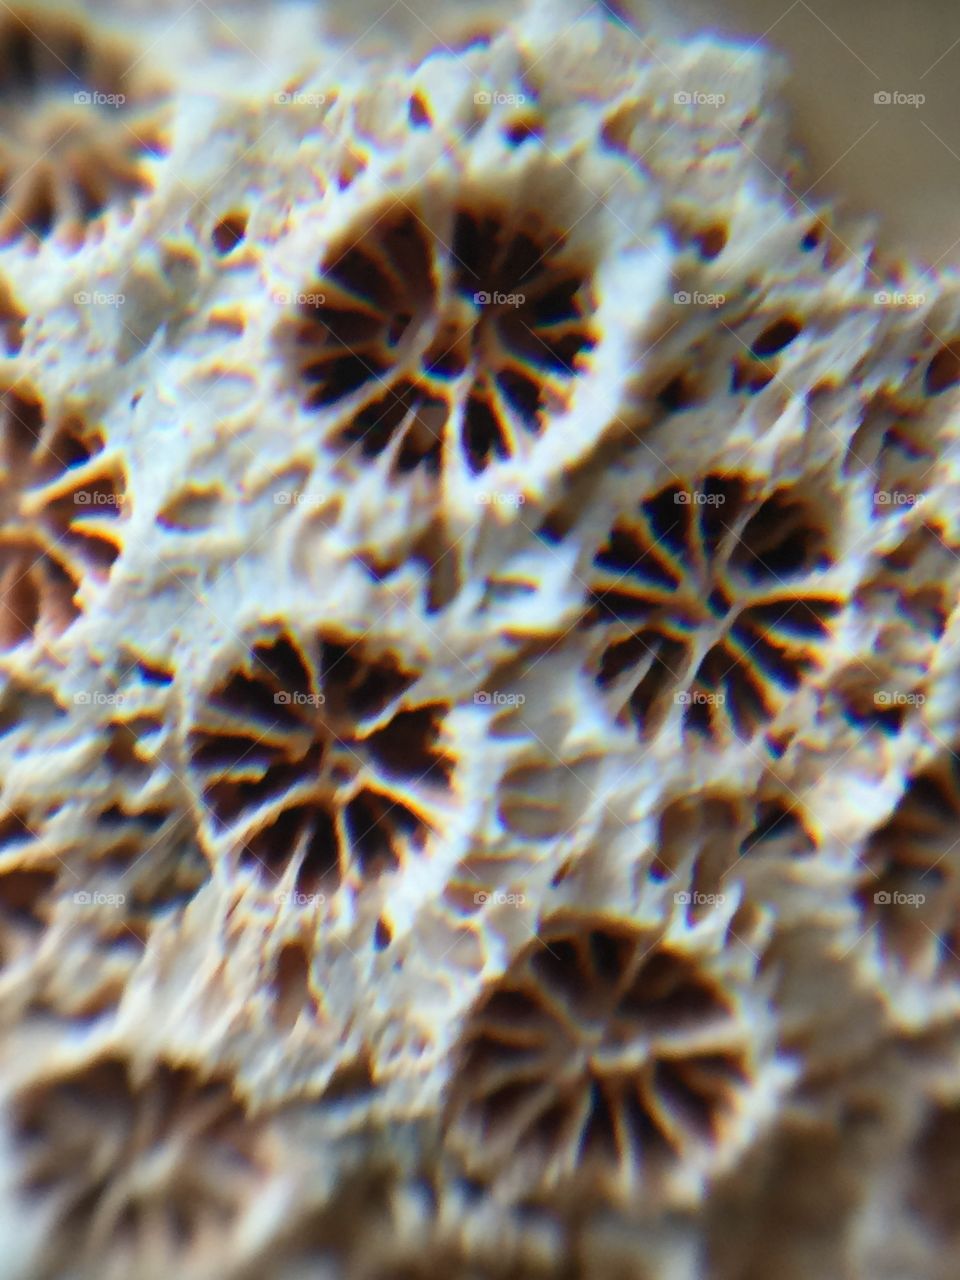 This macro shot was taken with I phone 6 plus of a piece of coral